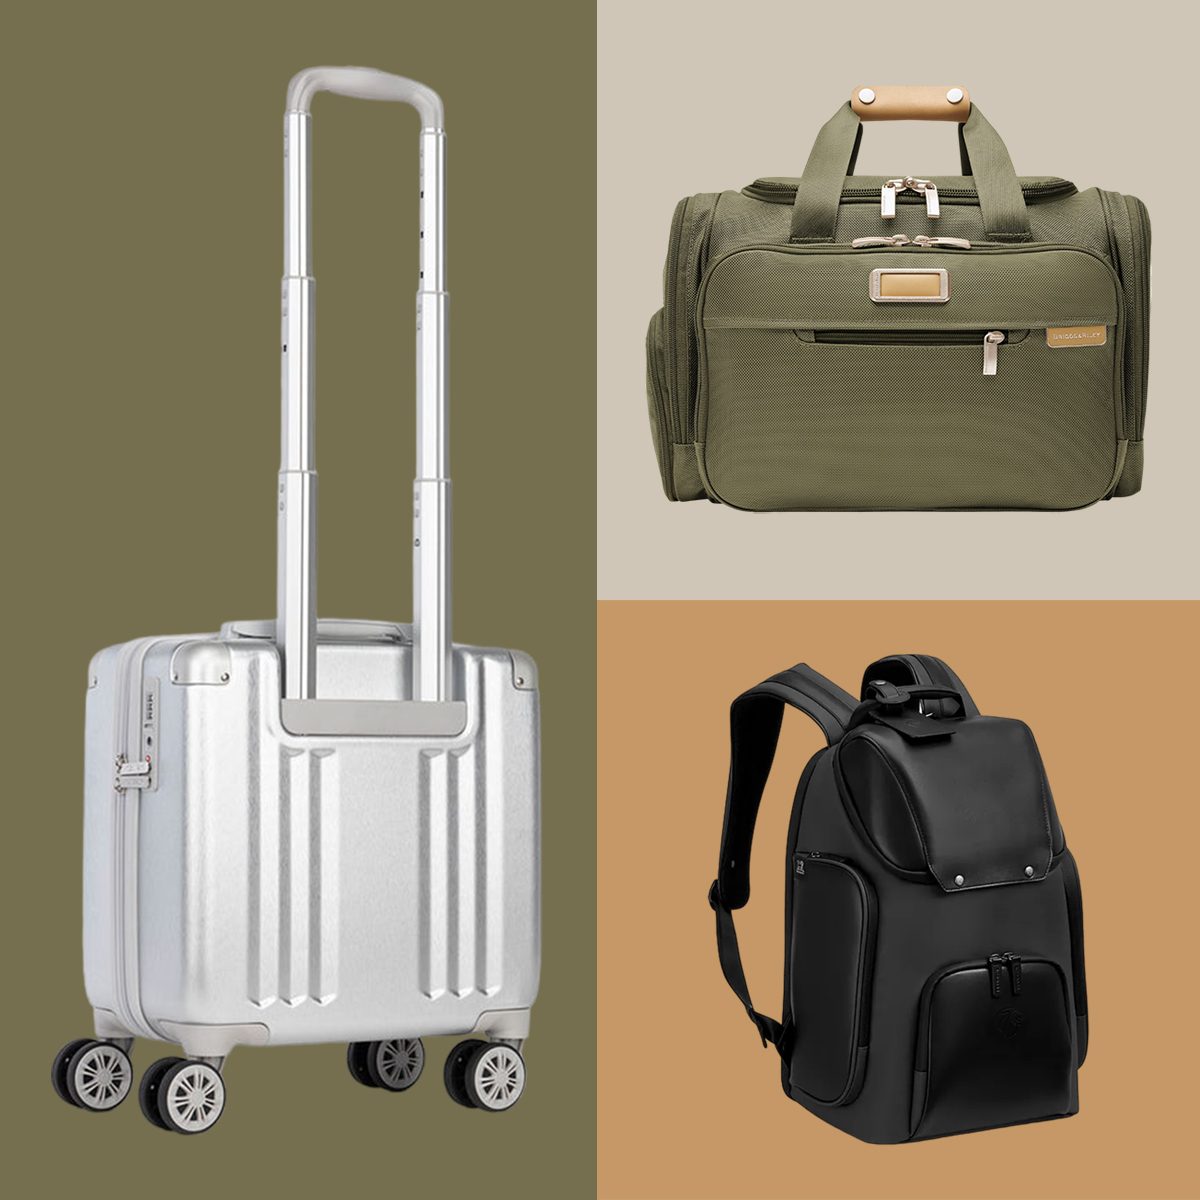 The Best Underseat Luggage With Wheels